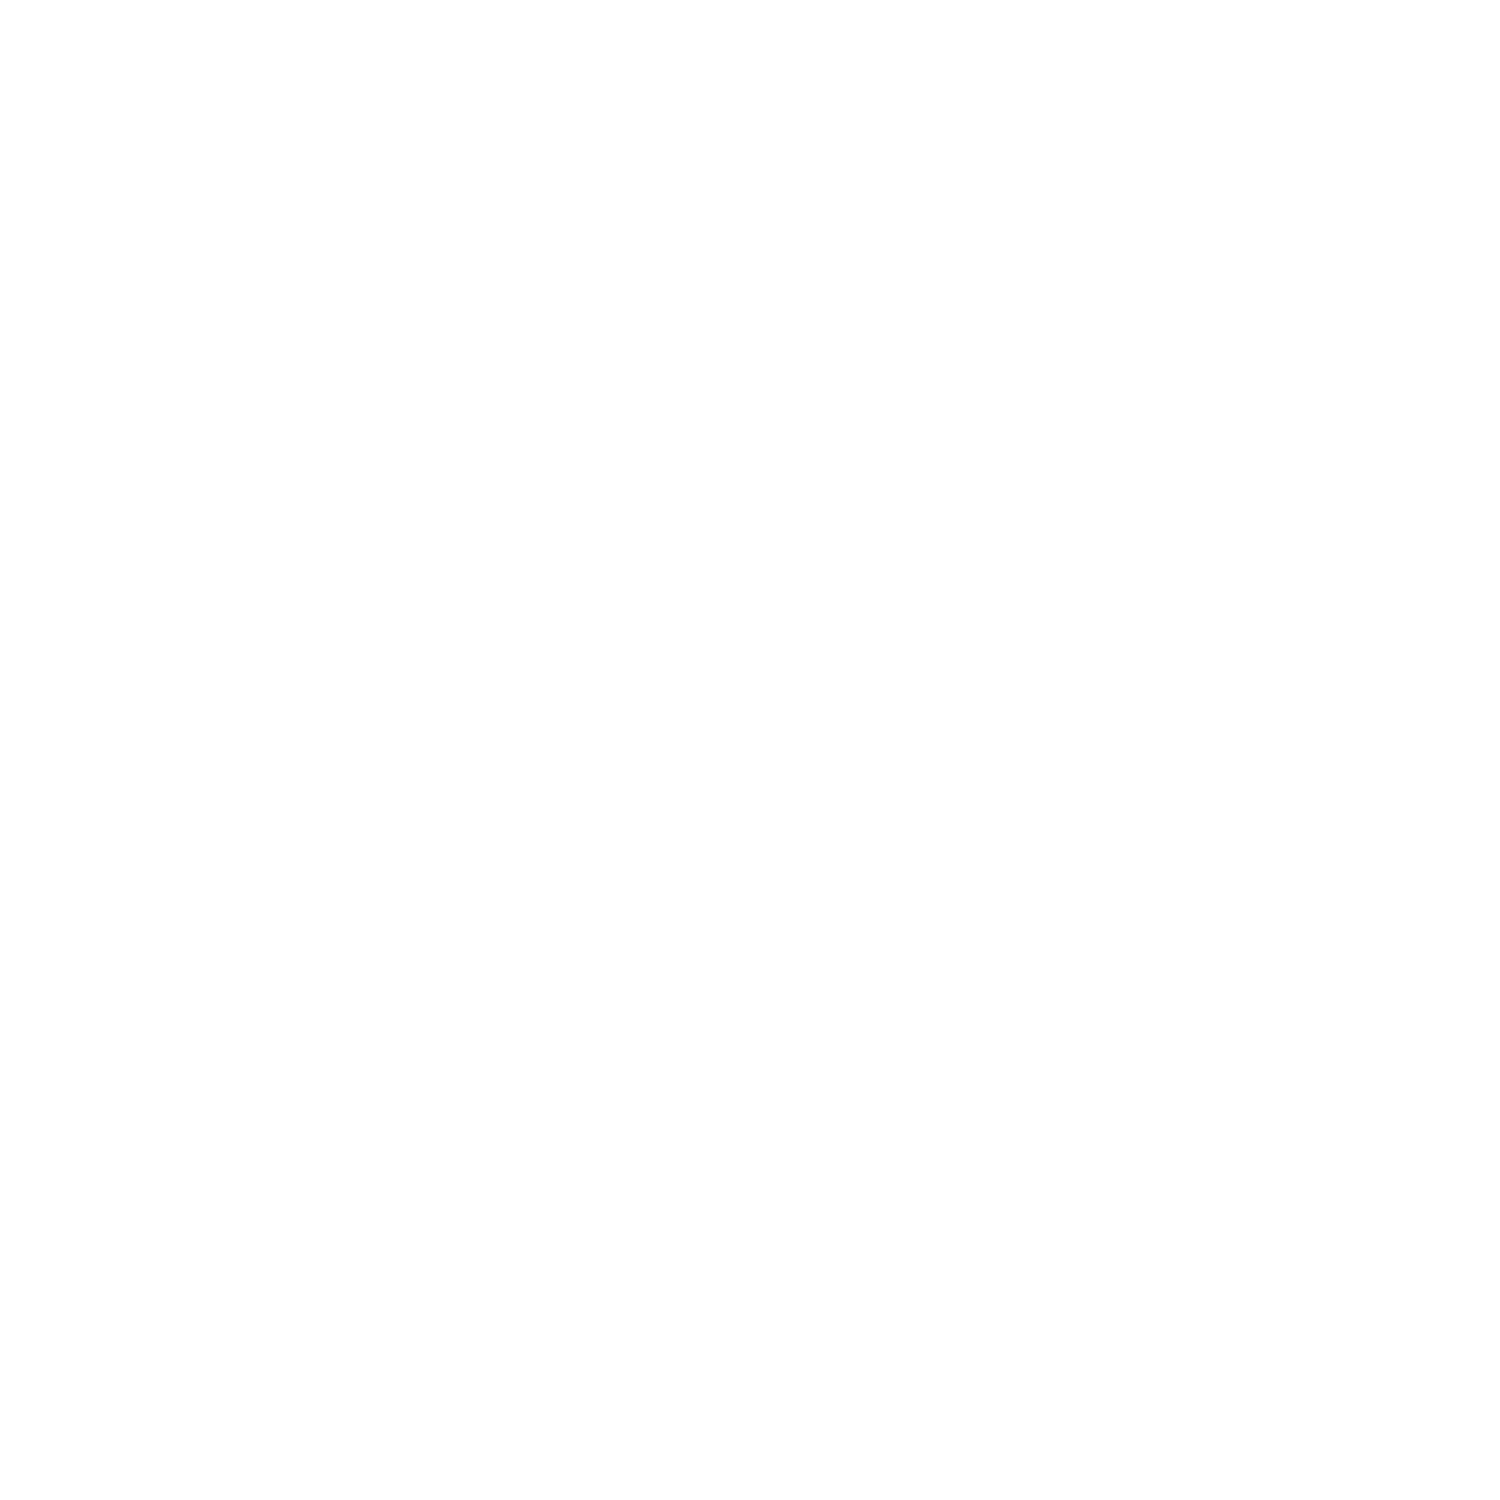 Clifford Exterior Cleaning &amp; Renovation